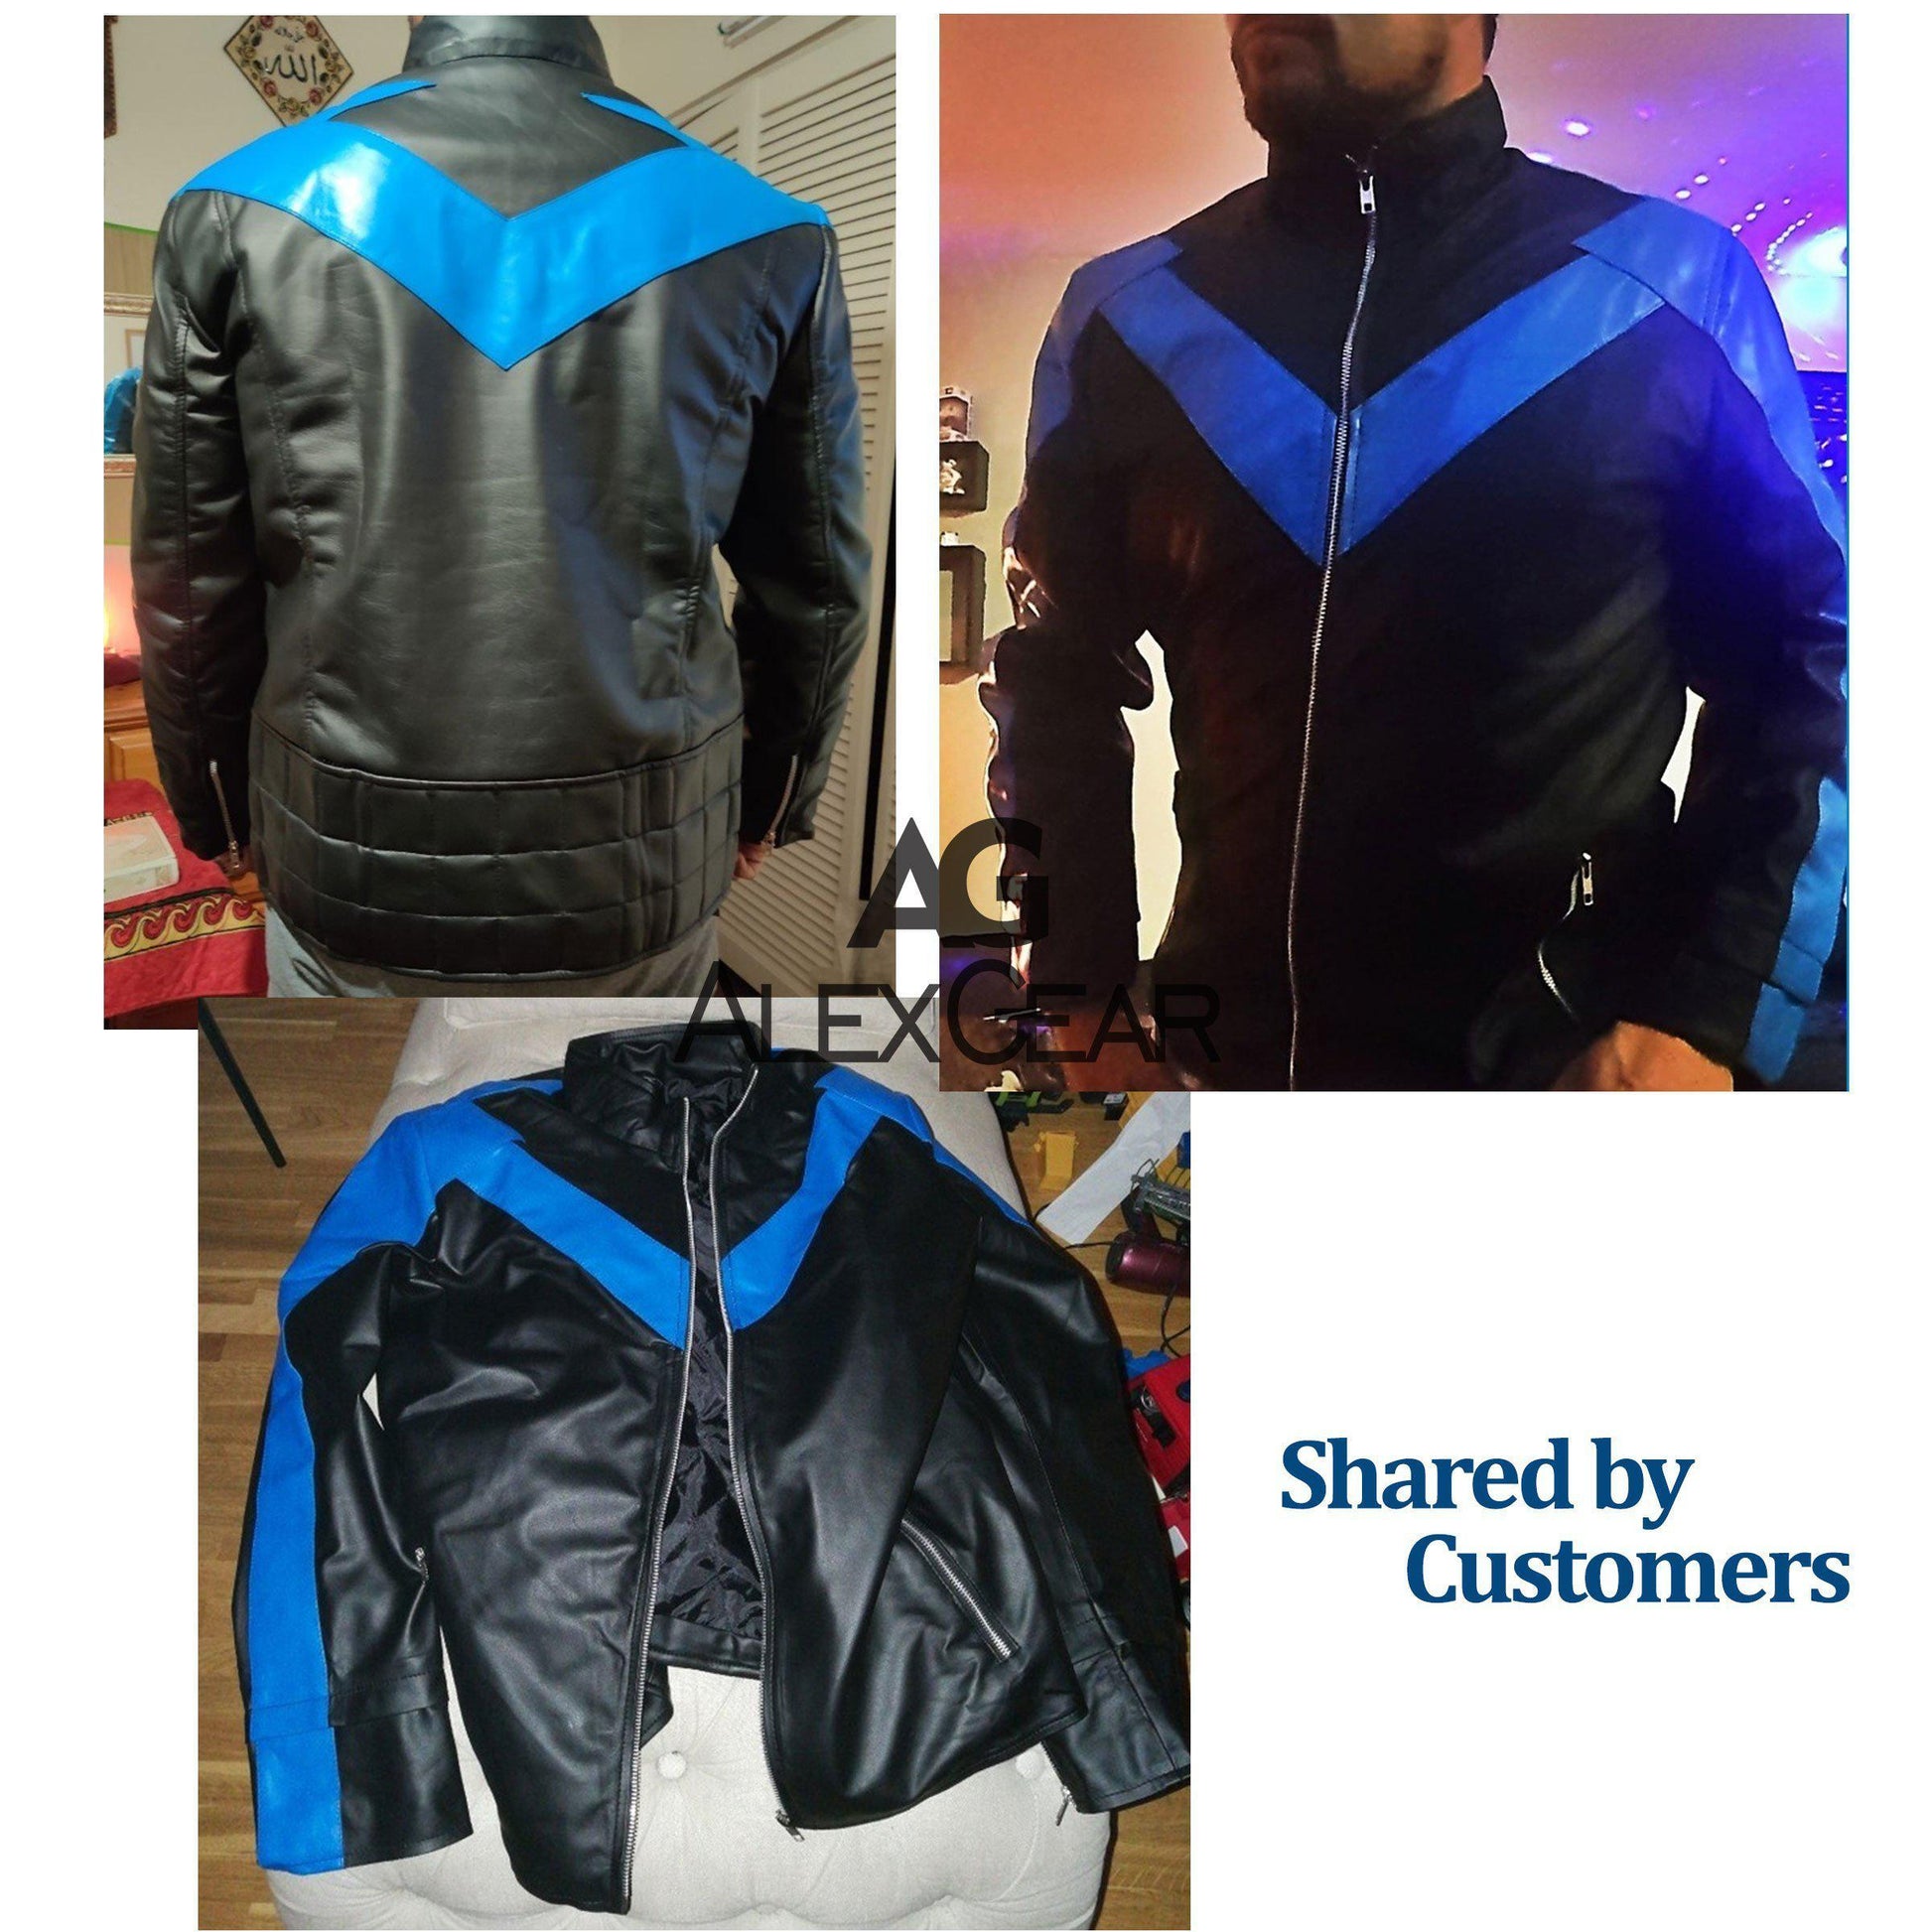 Nightwing Jacket Ordered by Customers